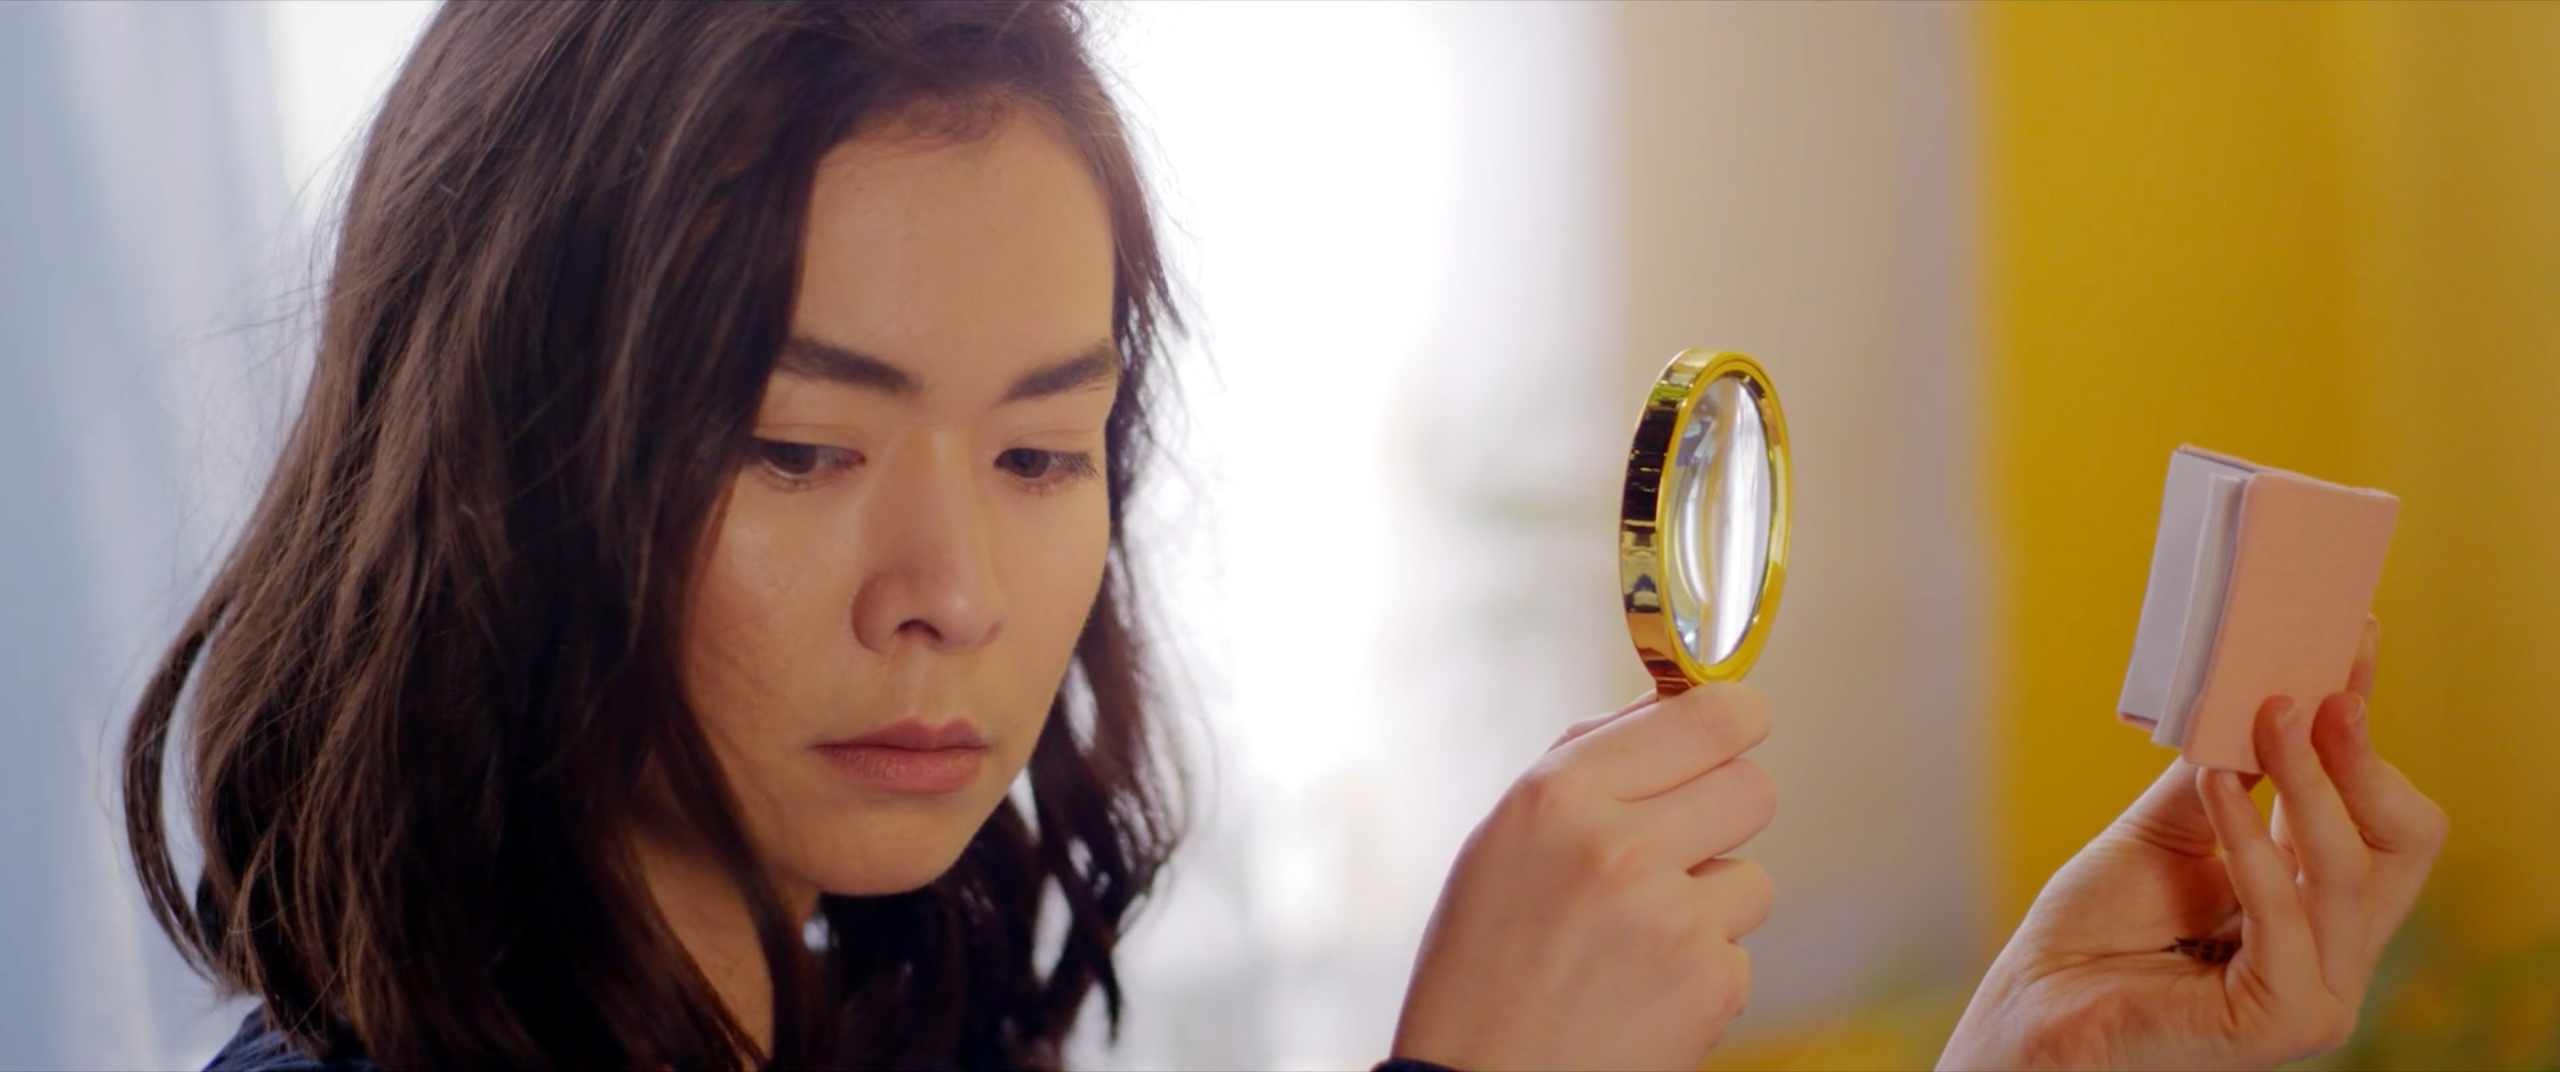 Women’s Day: “Mom, I failed, I’m coming home” – On music, loneliness, immigration, and Mitski